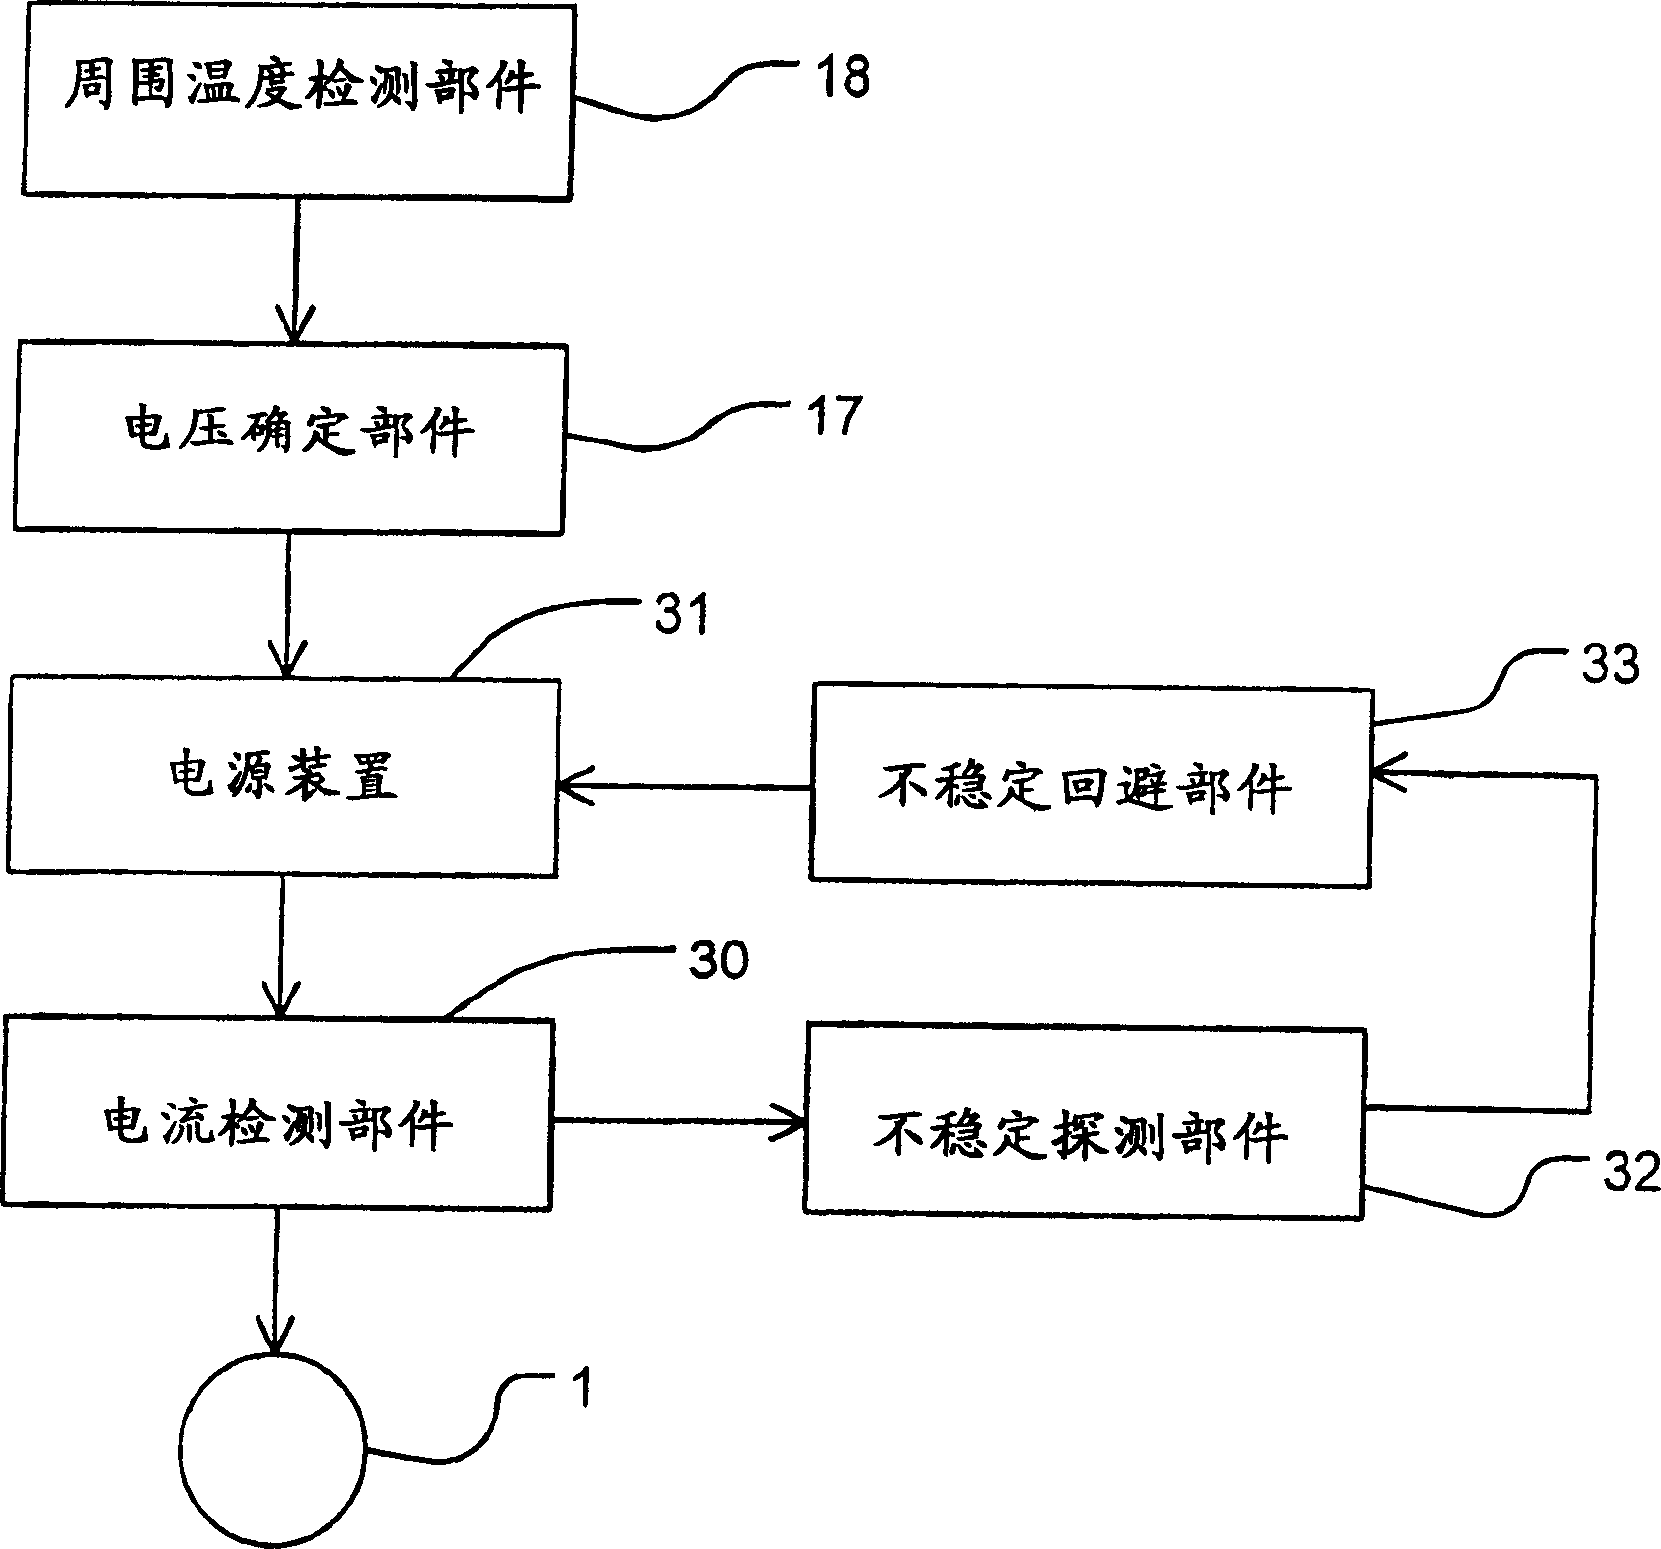 Control device of linear compressor drive system